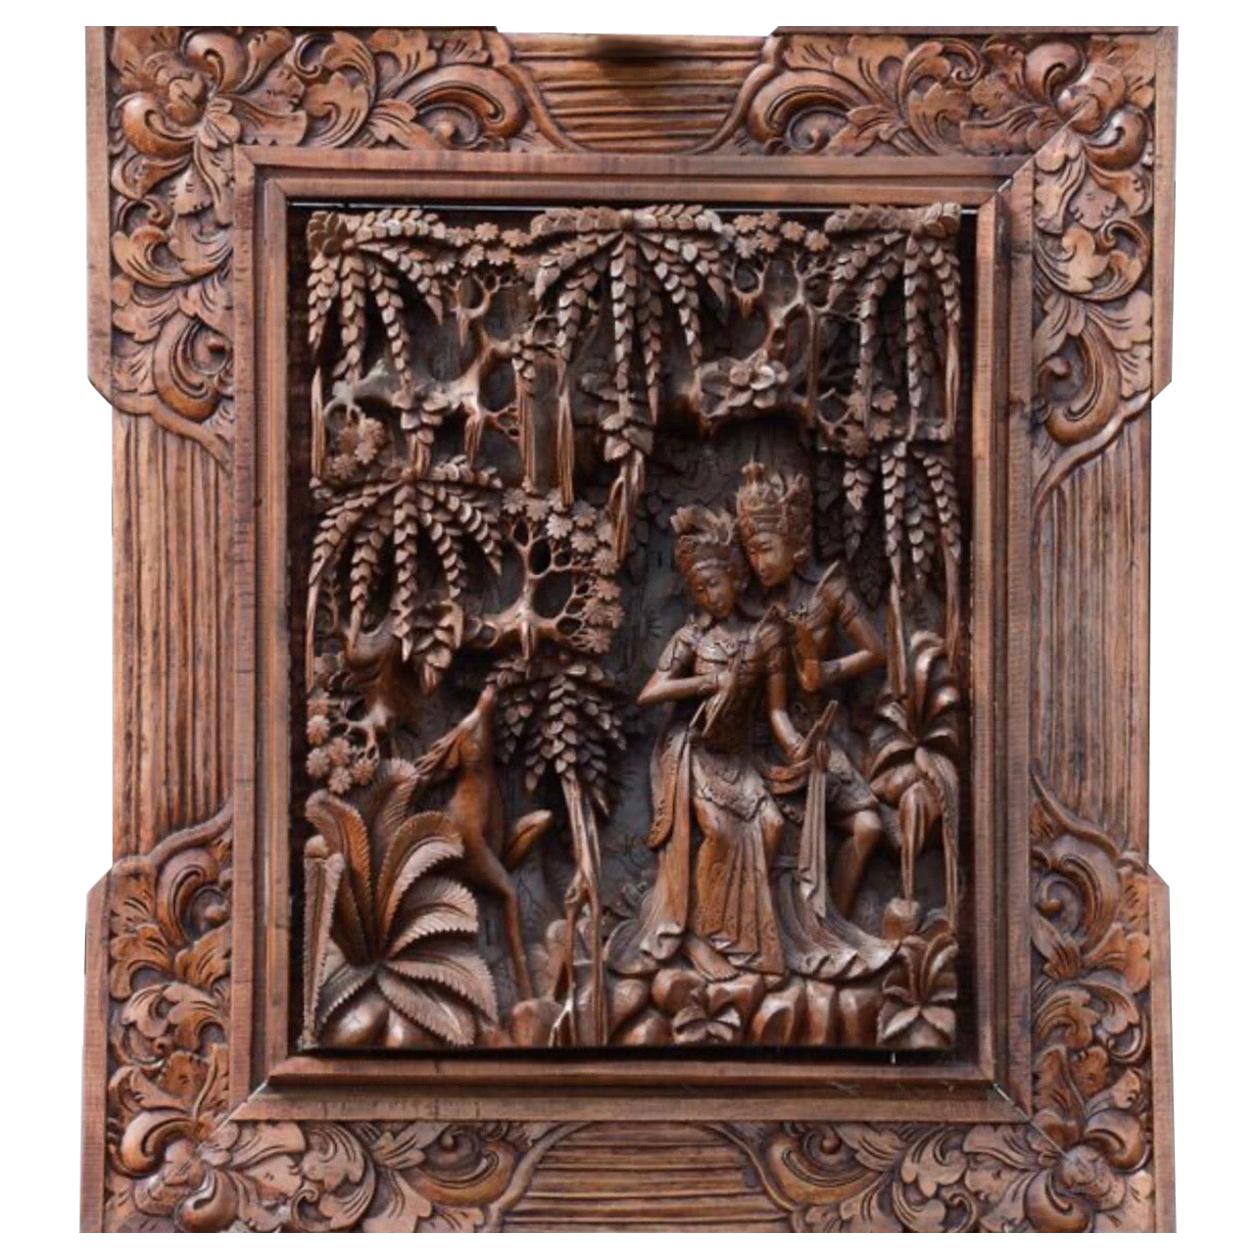 Ancient Carving of Exotic Wood Representing Two Lovers Hidden Among the Trees